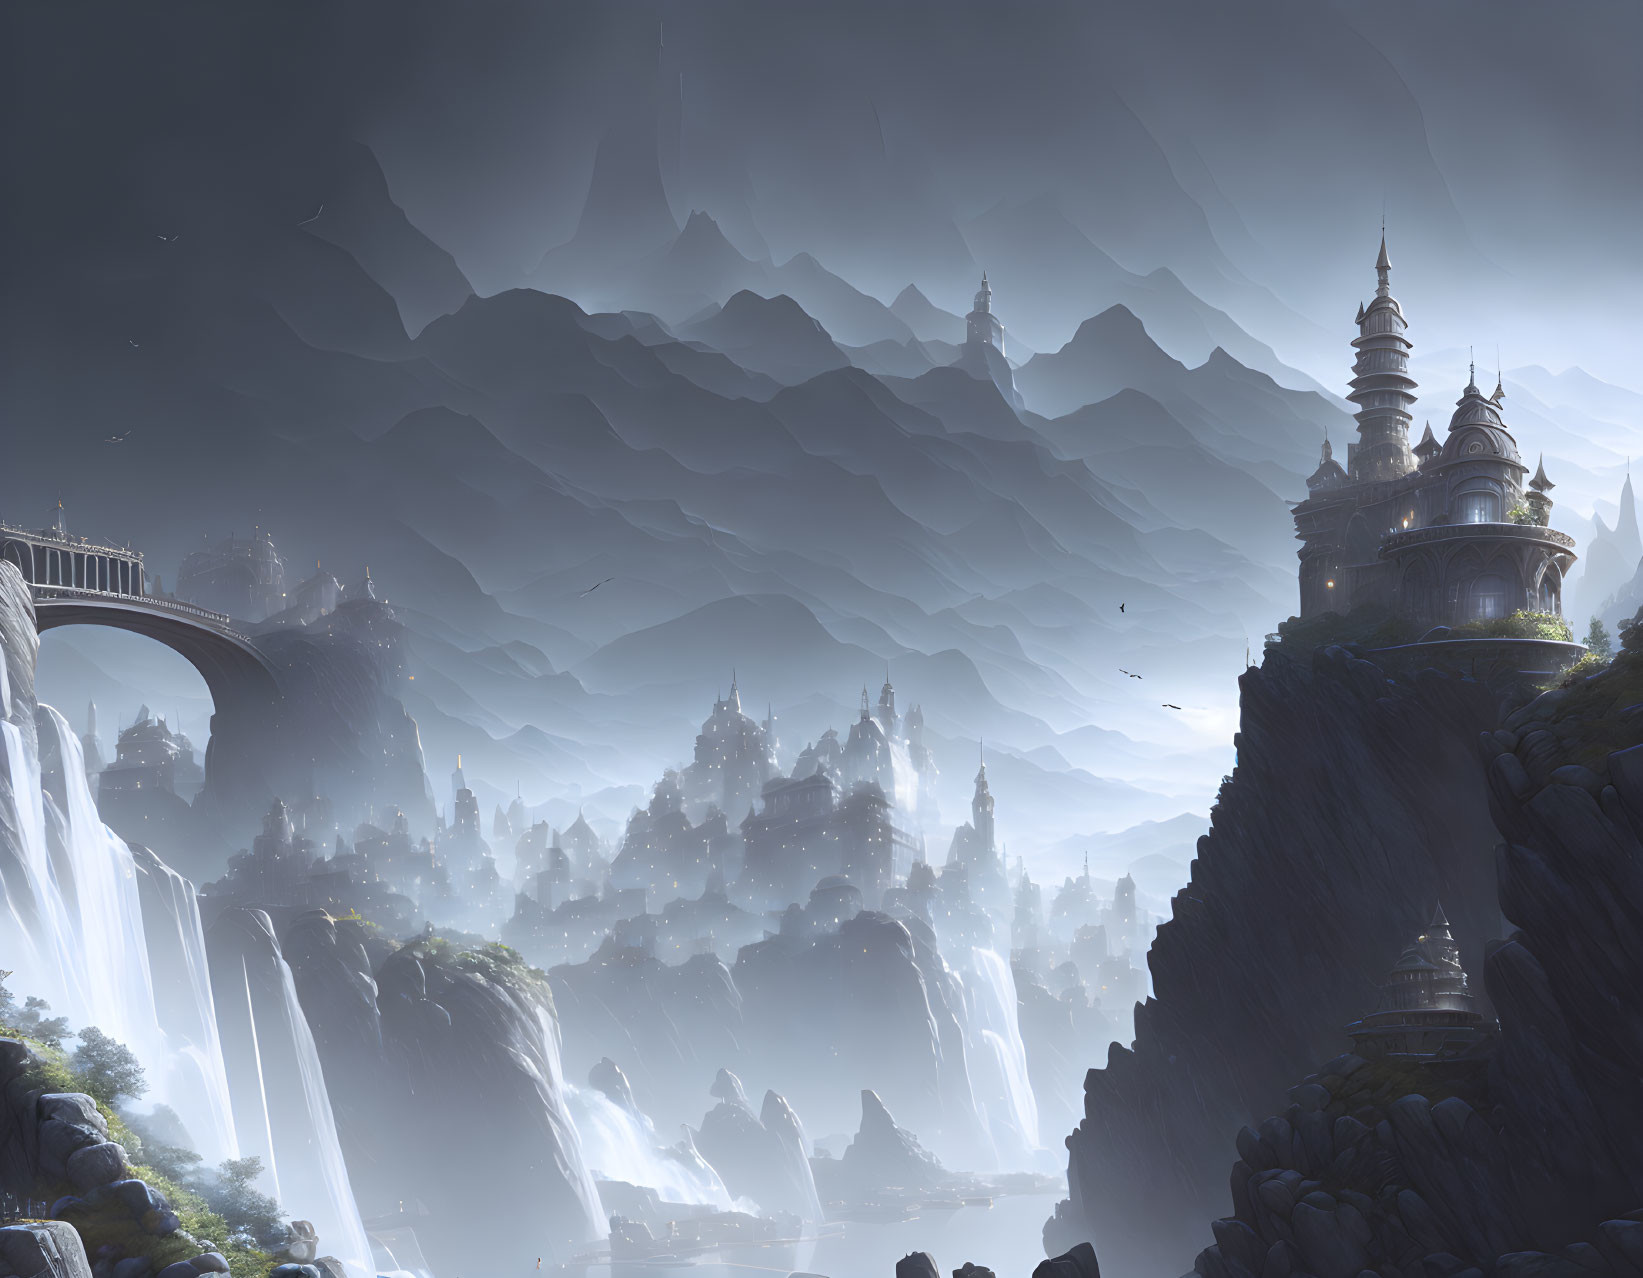 Mystical city with waterfalls, spires, bridges in foggy mountain landscape